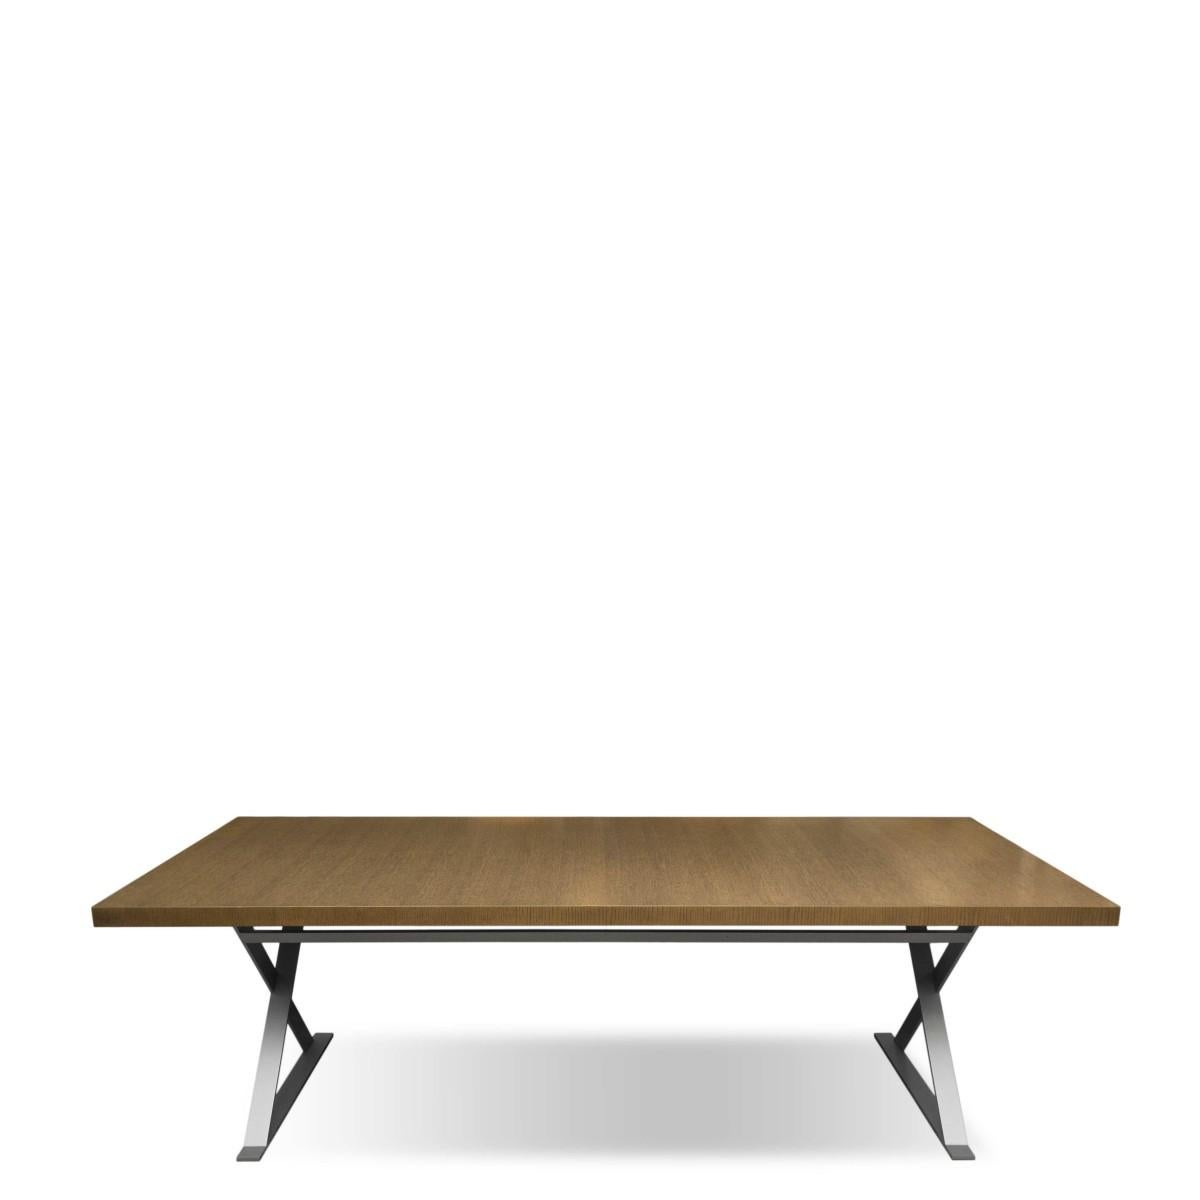 The Max dining table with cerused oak wood top and metal base by Antonio Citterio for B&B Italia. Made in Italy, circa 2000. 

The wood top features a marsh brown finish and sits on a nickel painted finished base.

Dimensions: 94.5 inches L x 35.5